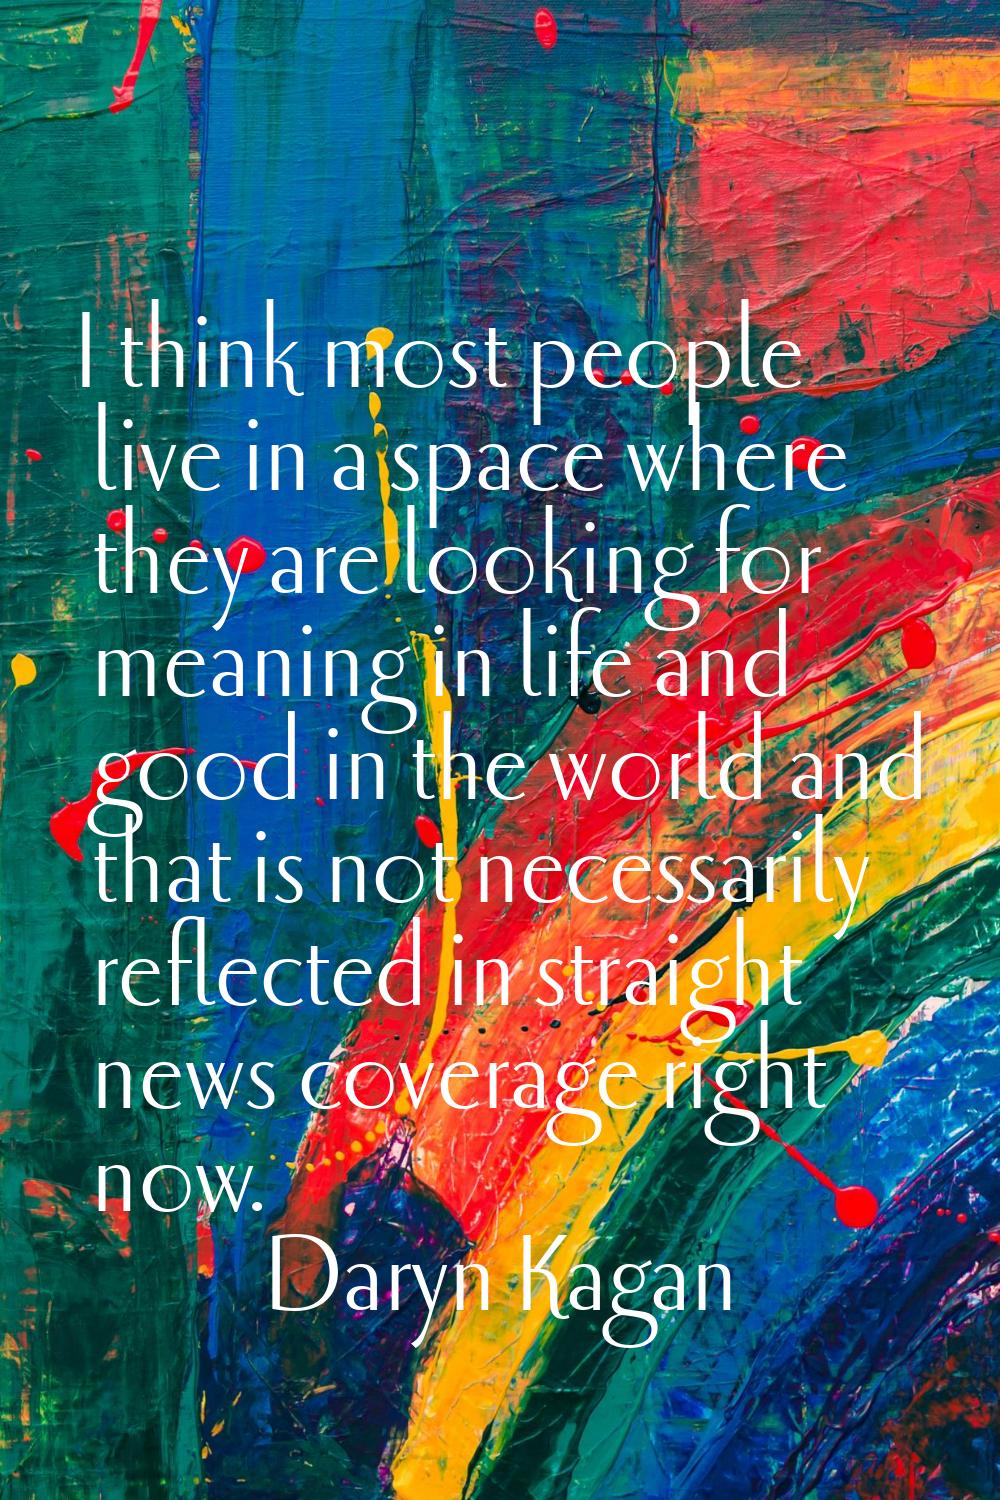 I think most people live in a space where they are looking for meaning in life and good in the worl